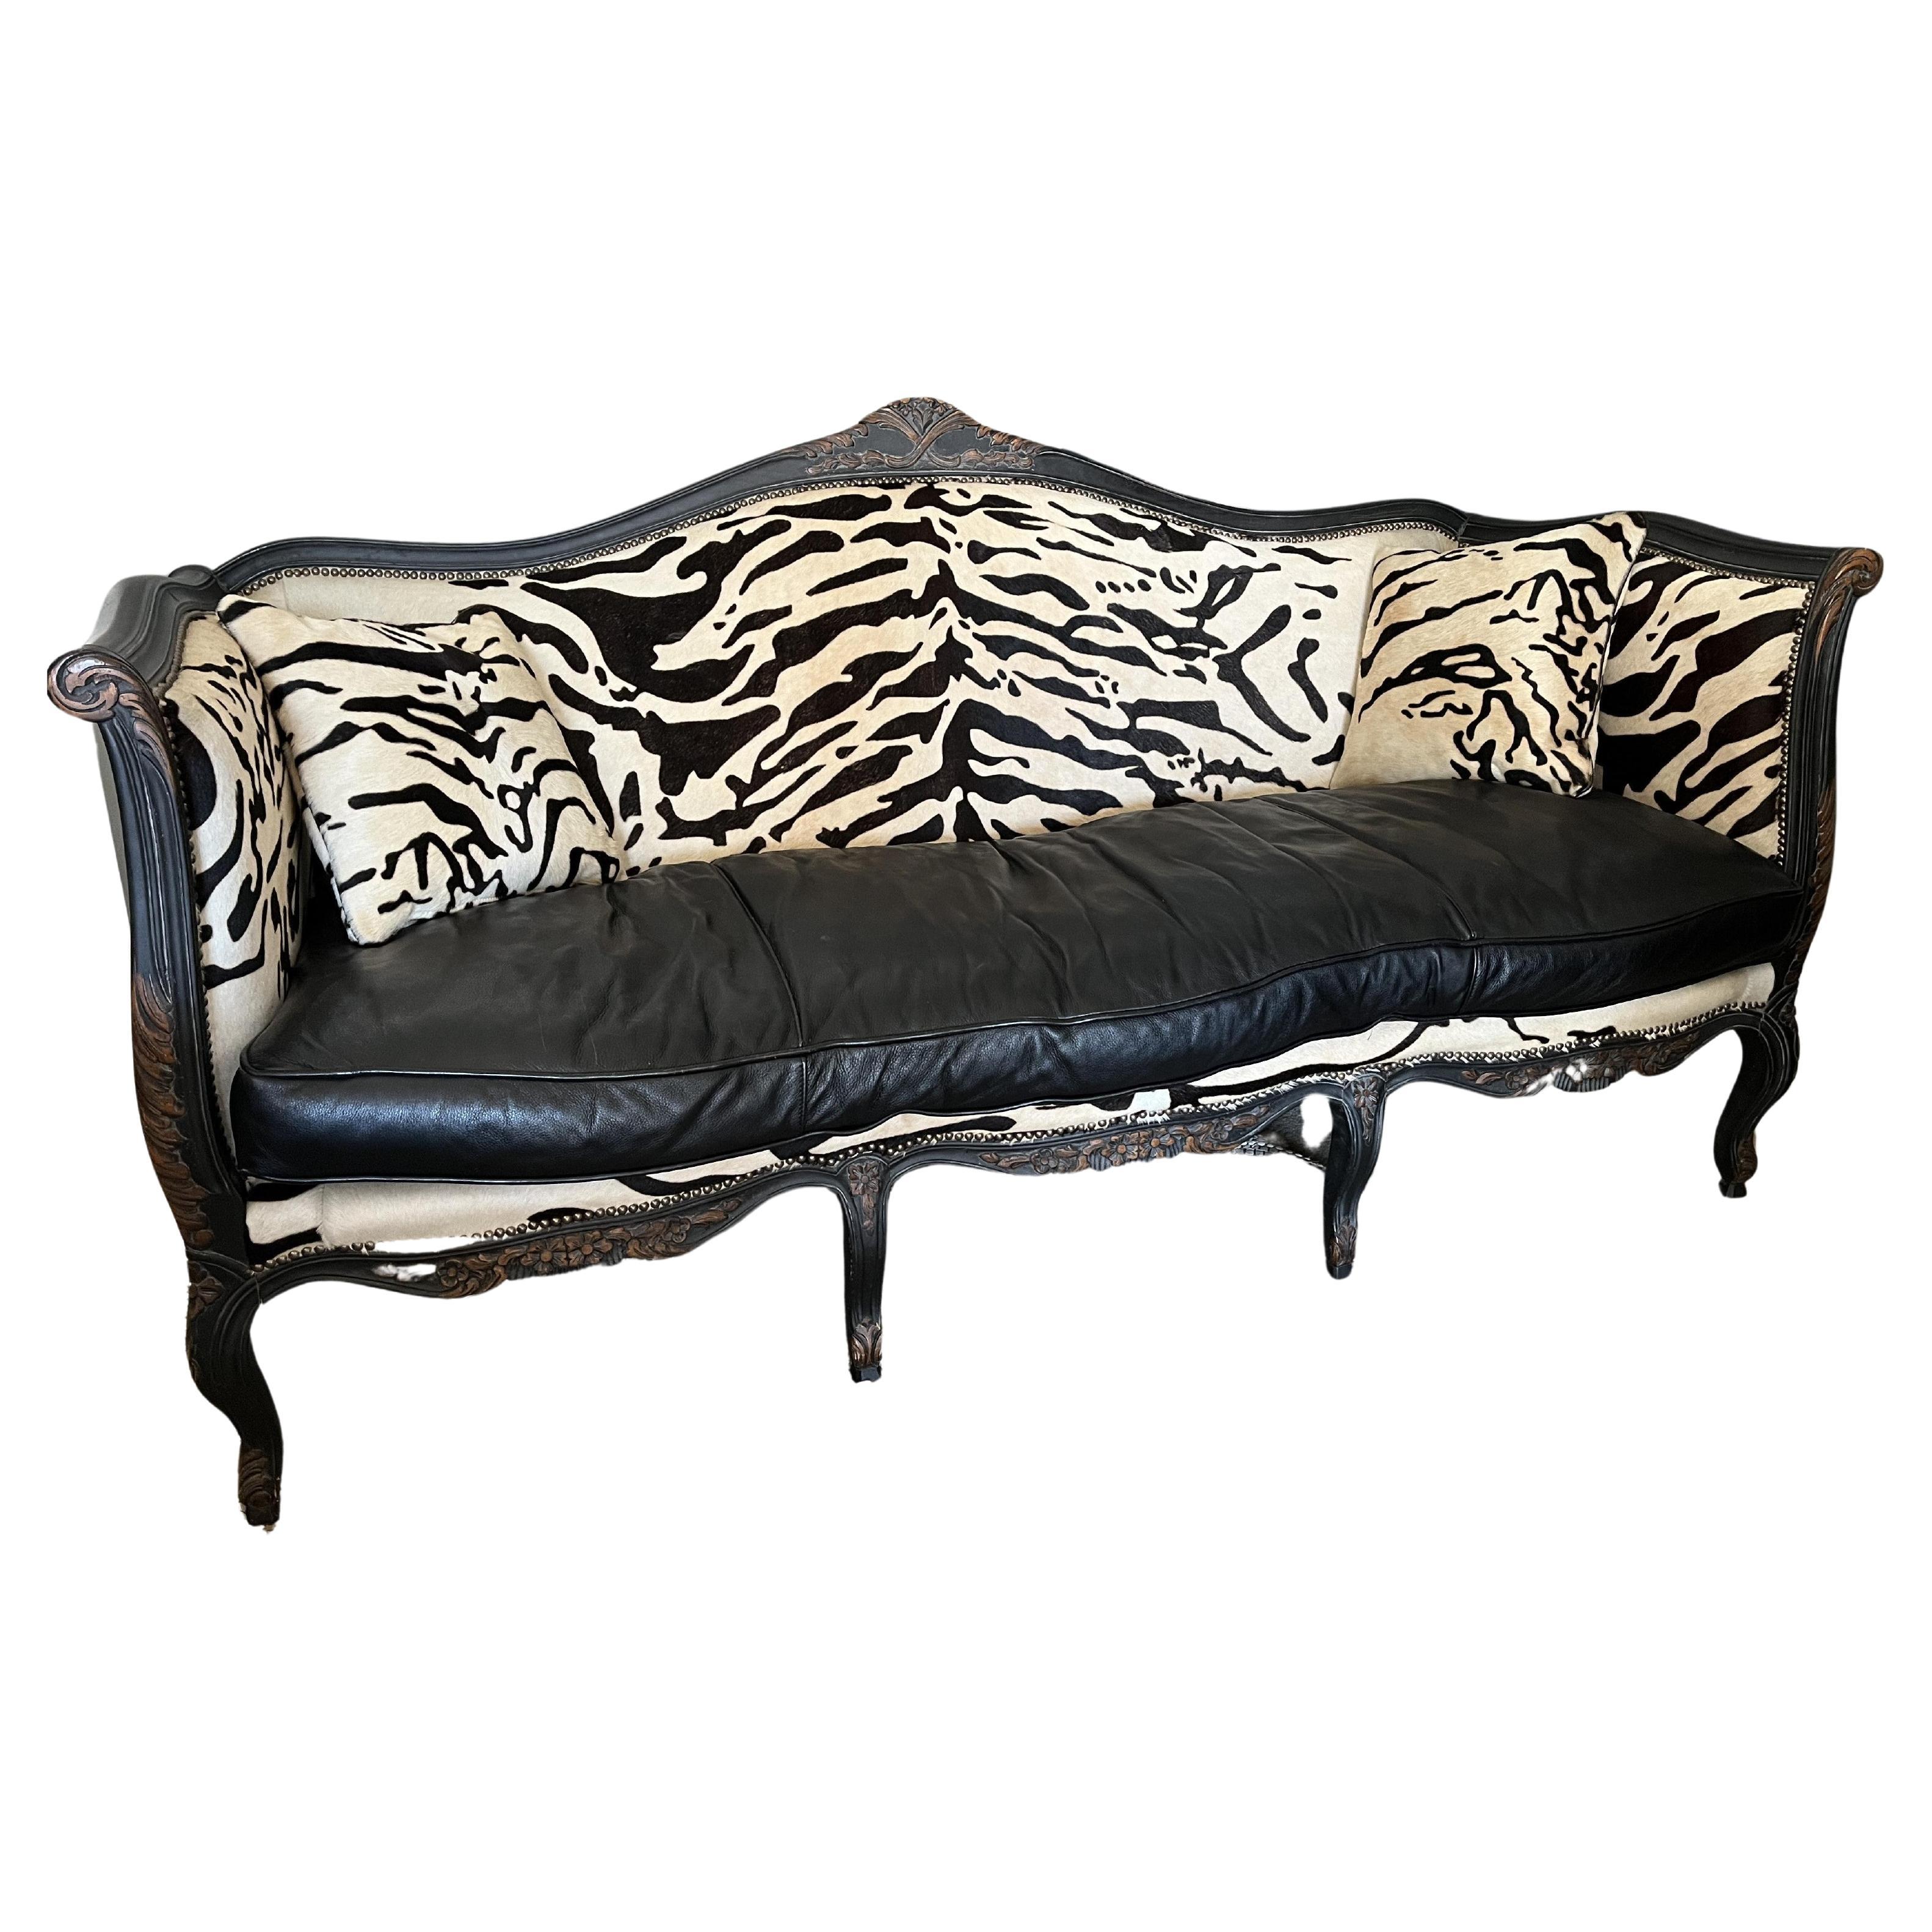 Old Hickory Tannery Sofas/Zebra Print Cowhair, Leather. Suede & Nailhead Trim